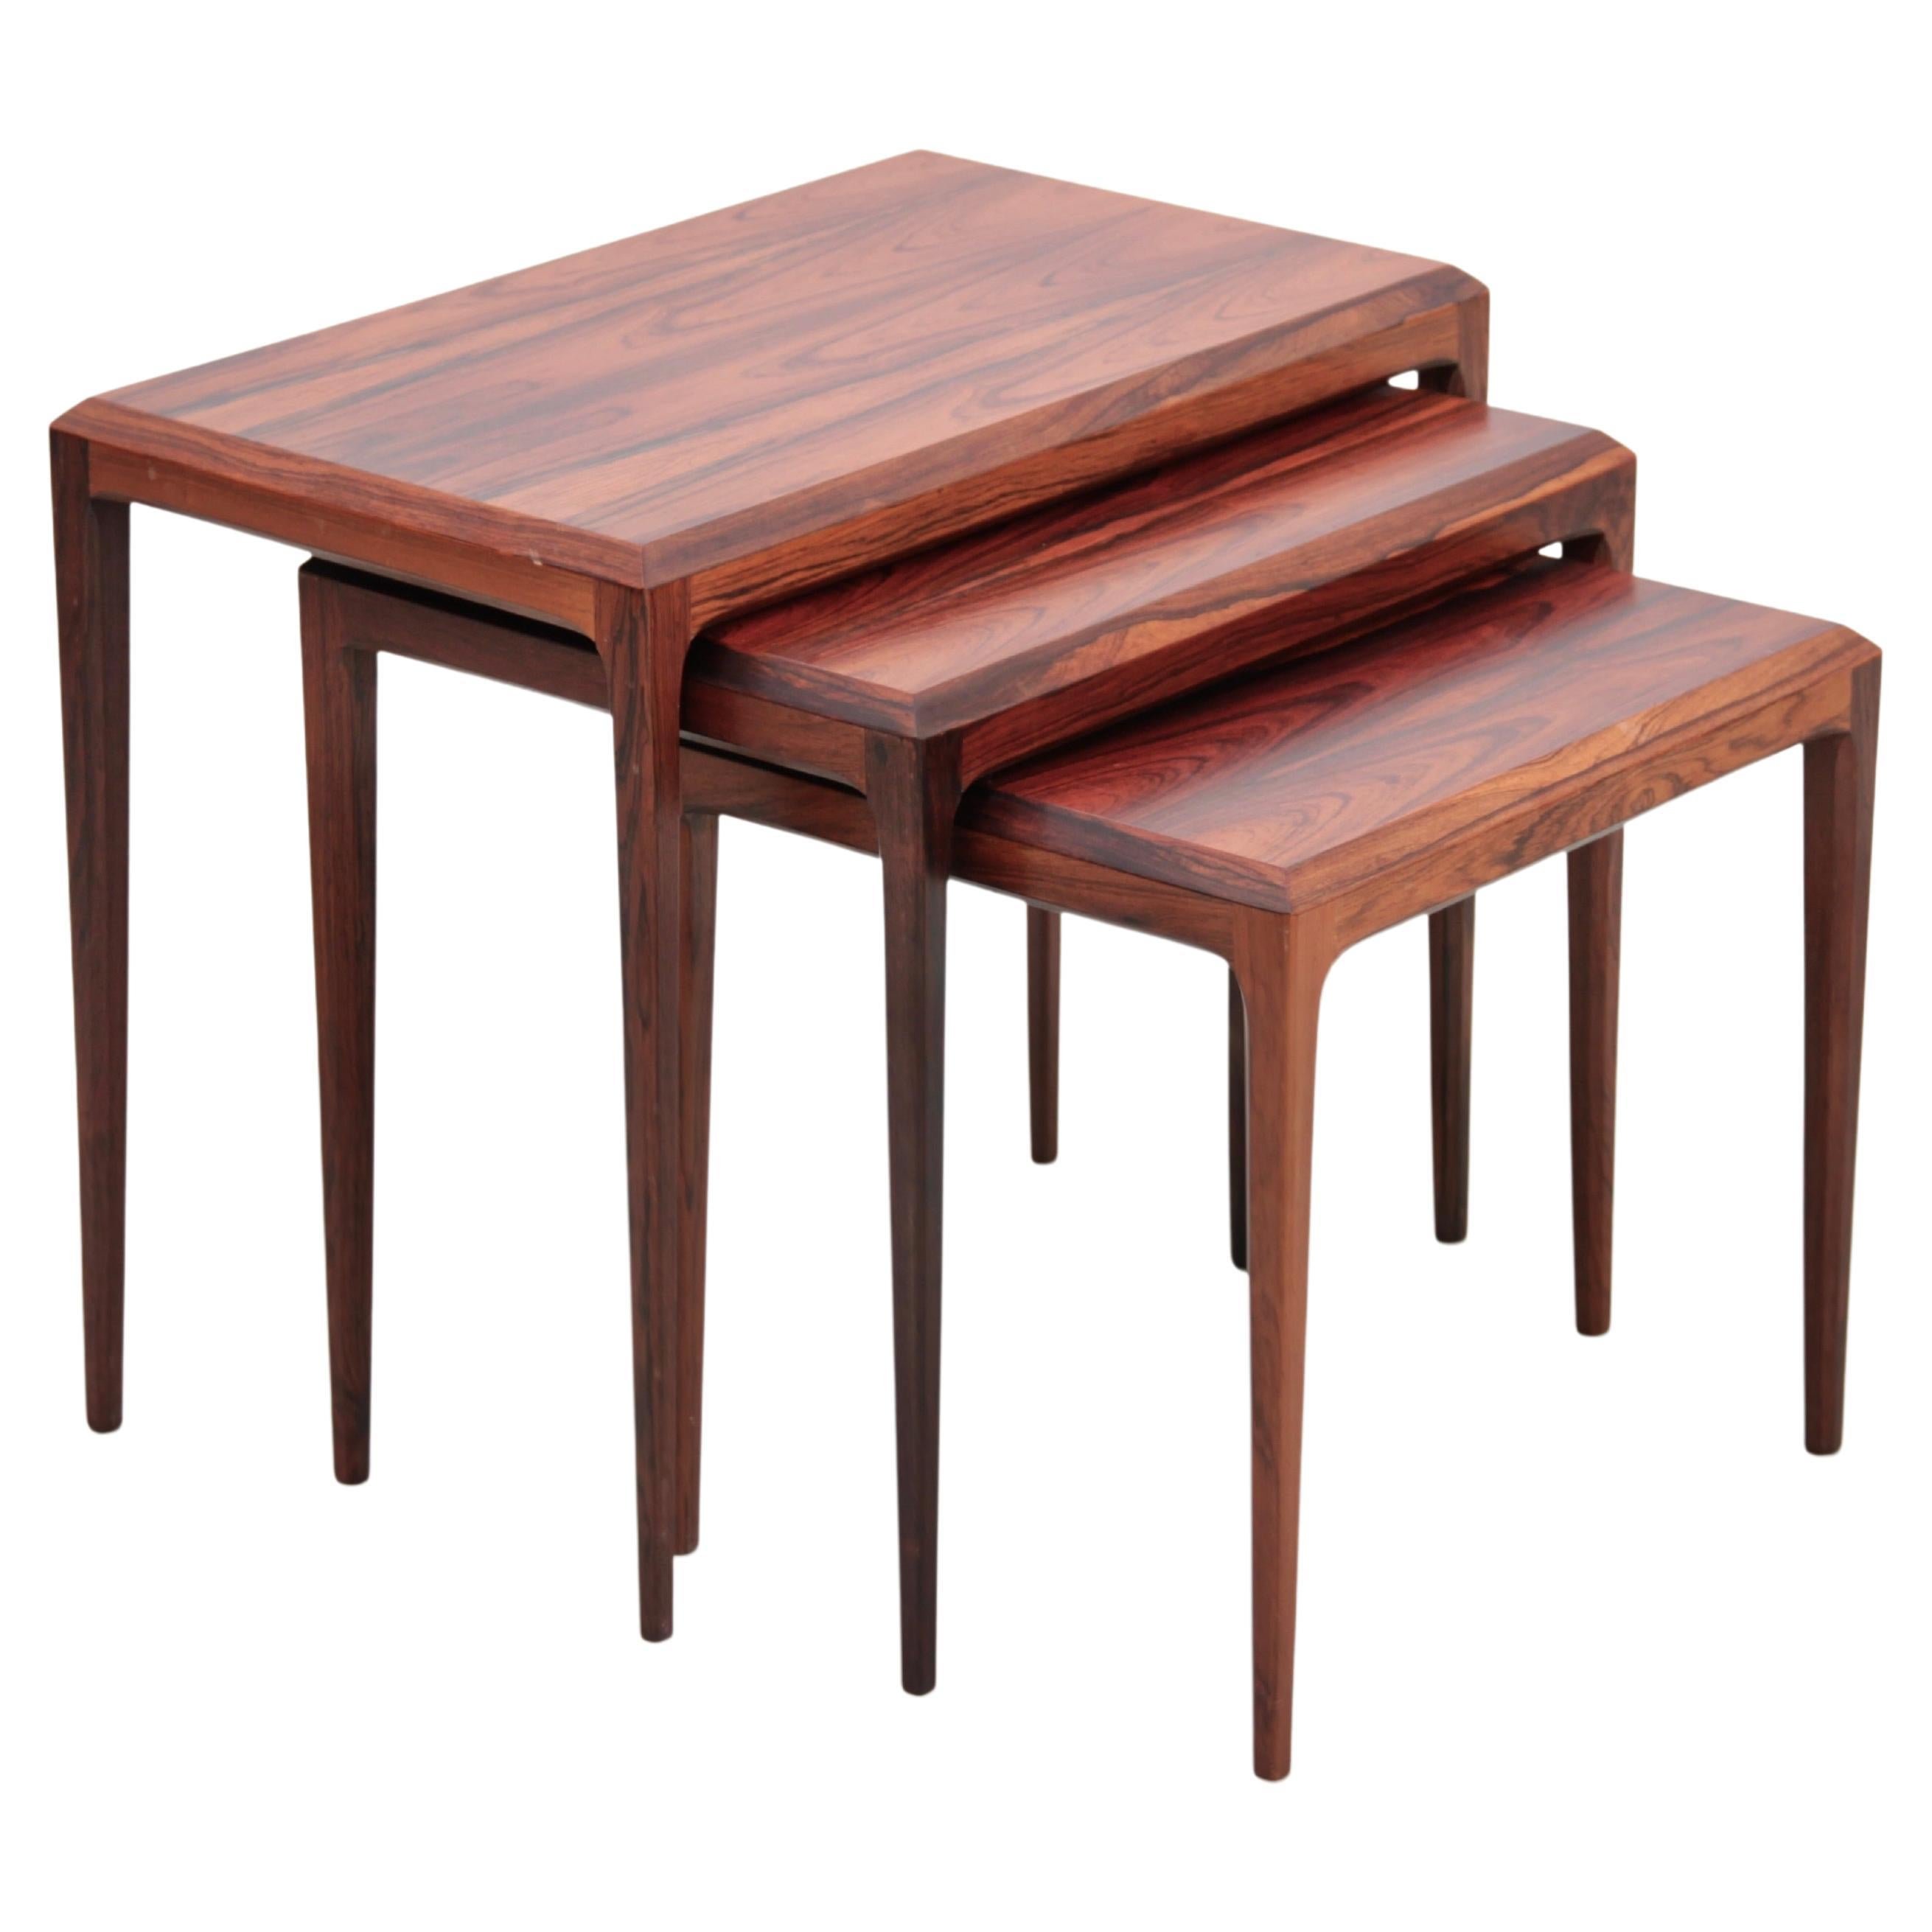 Mid-Century Modern Scandinavian Nesting Tables in Rio Rosewood by Johannes Ander For Sale